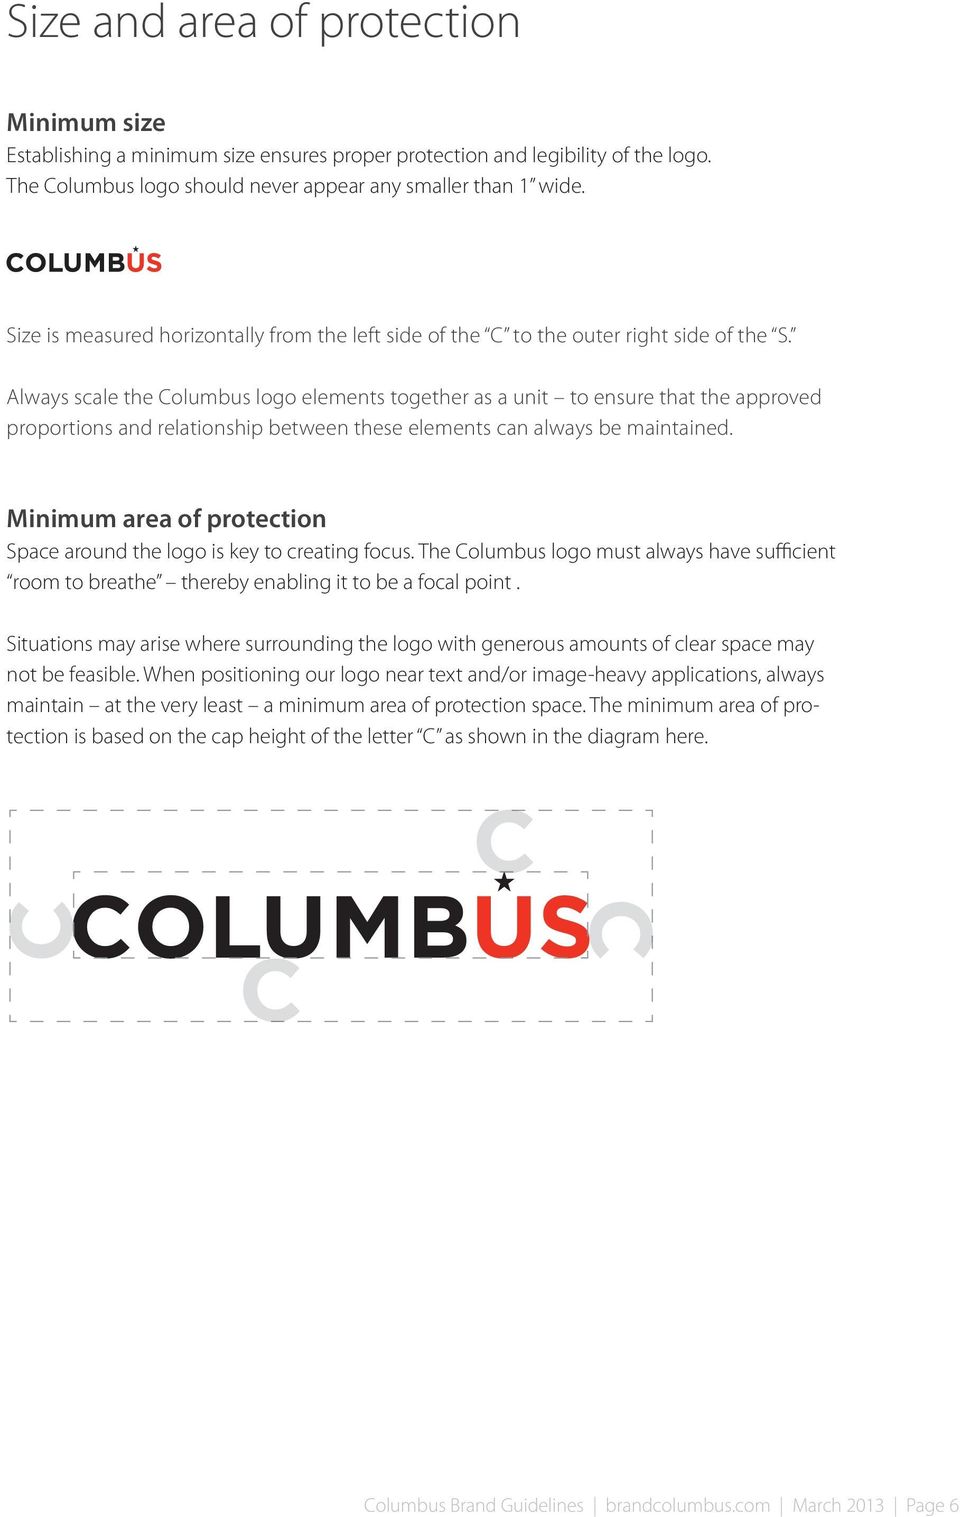 Always scale the Columbus logo elements together as a unit to ensure that the approved proportions and relationship between these elements can always be maintained.